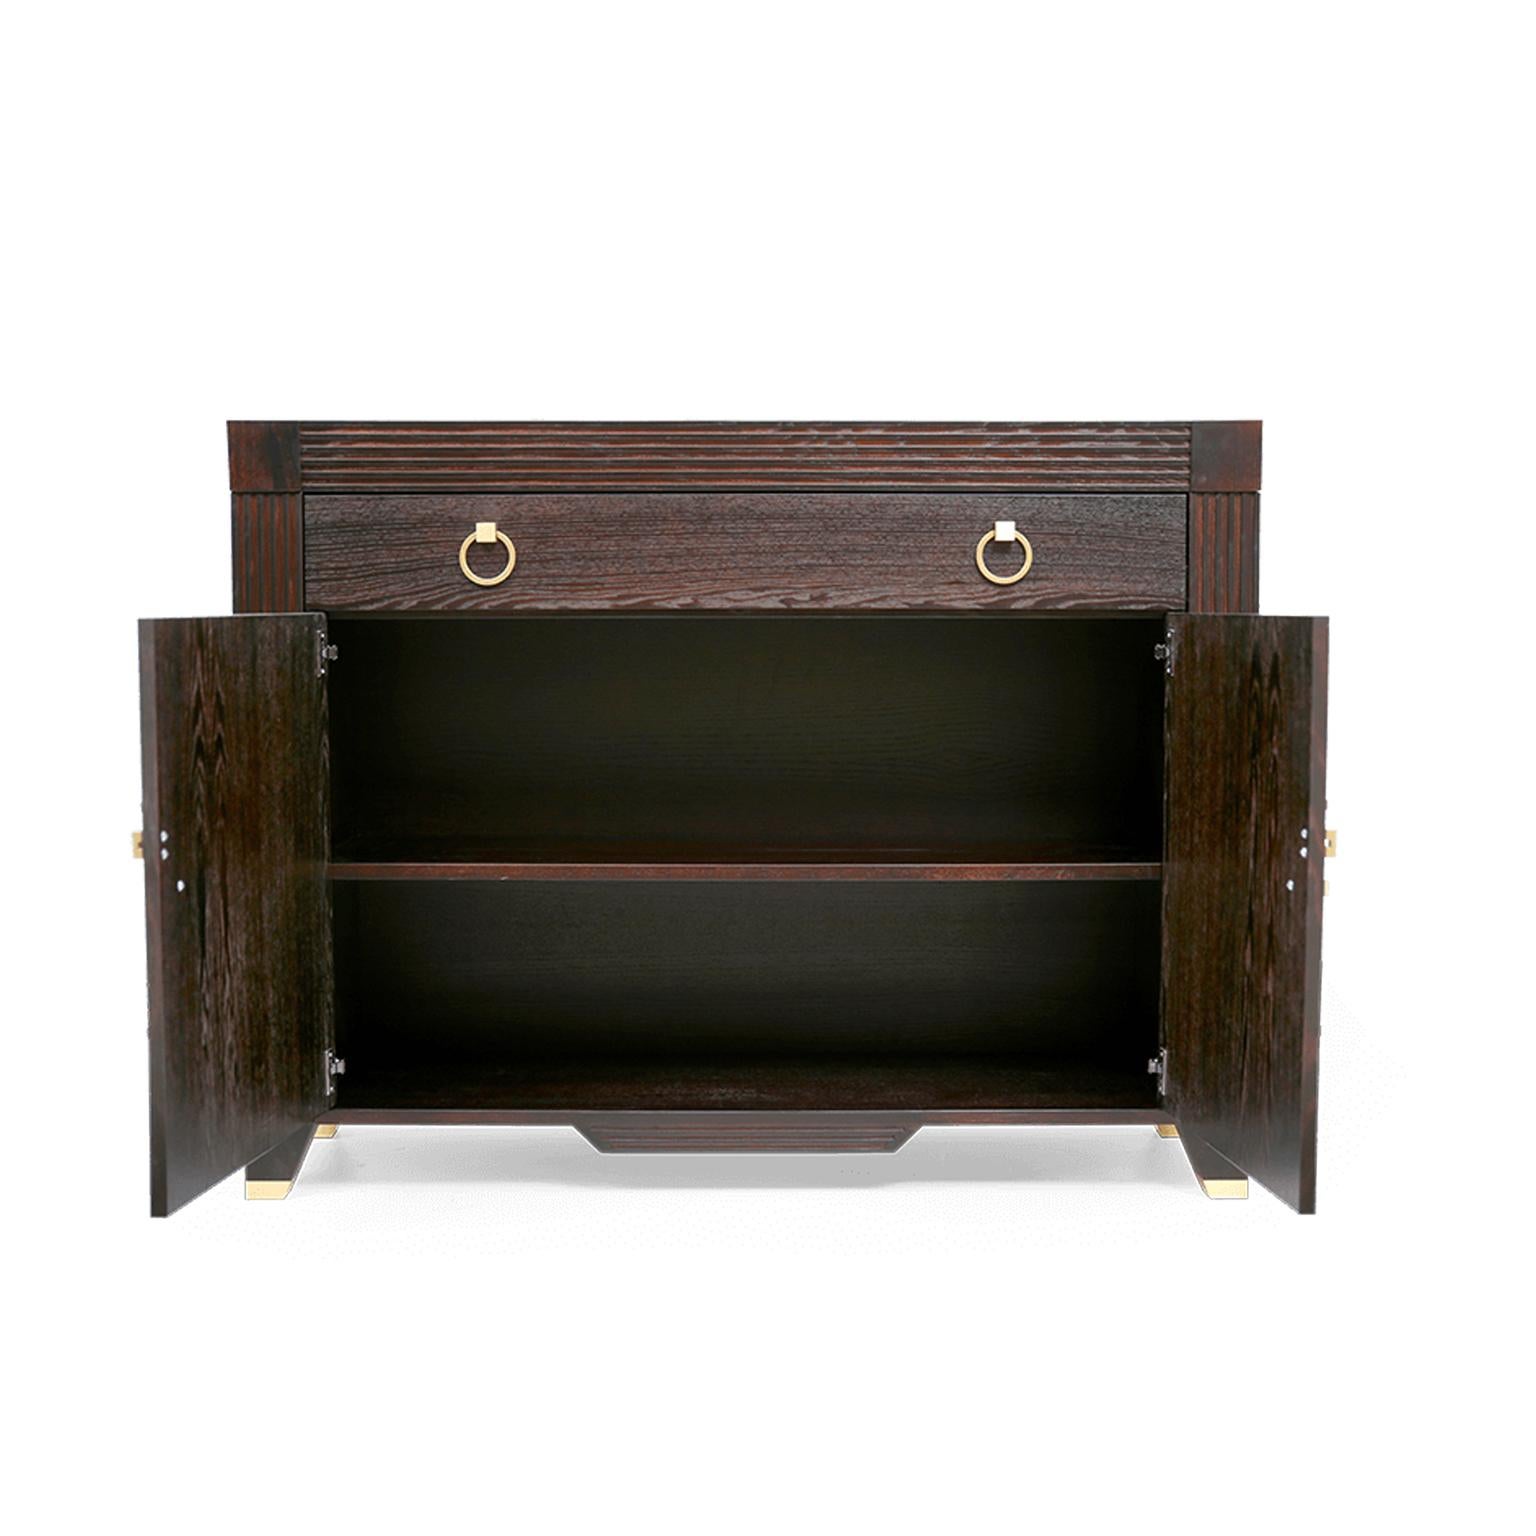 The sideboard hero is a modern living room cabinet, perfect for organizing and storing all your belongings. Its features include two spacious drawers and a large shelve behind two doors for your storage. Featuring a dark brown finish and creatively